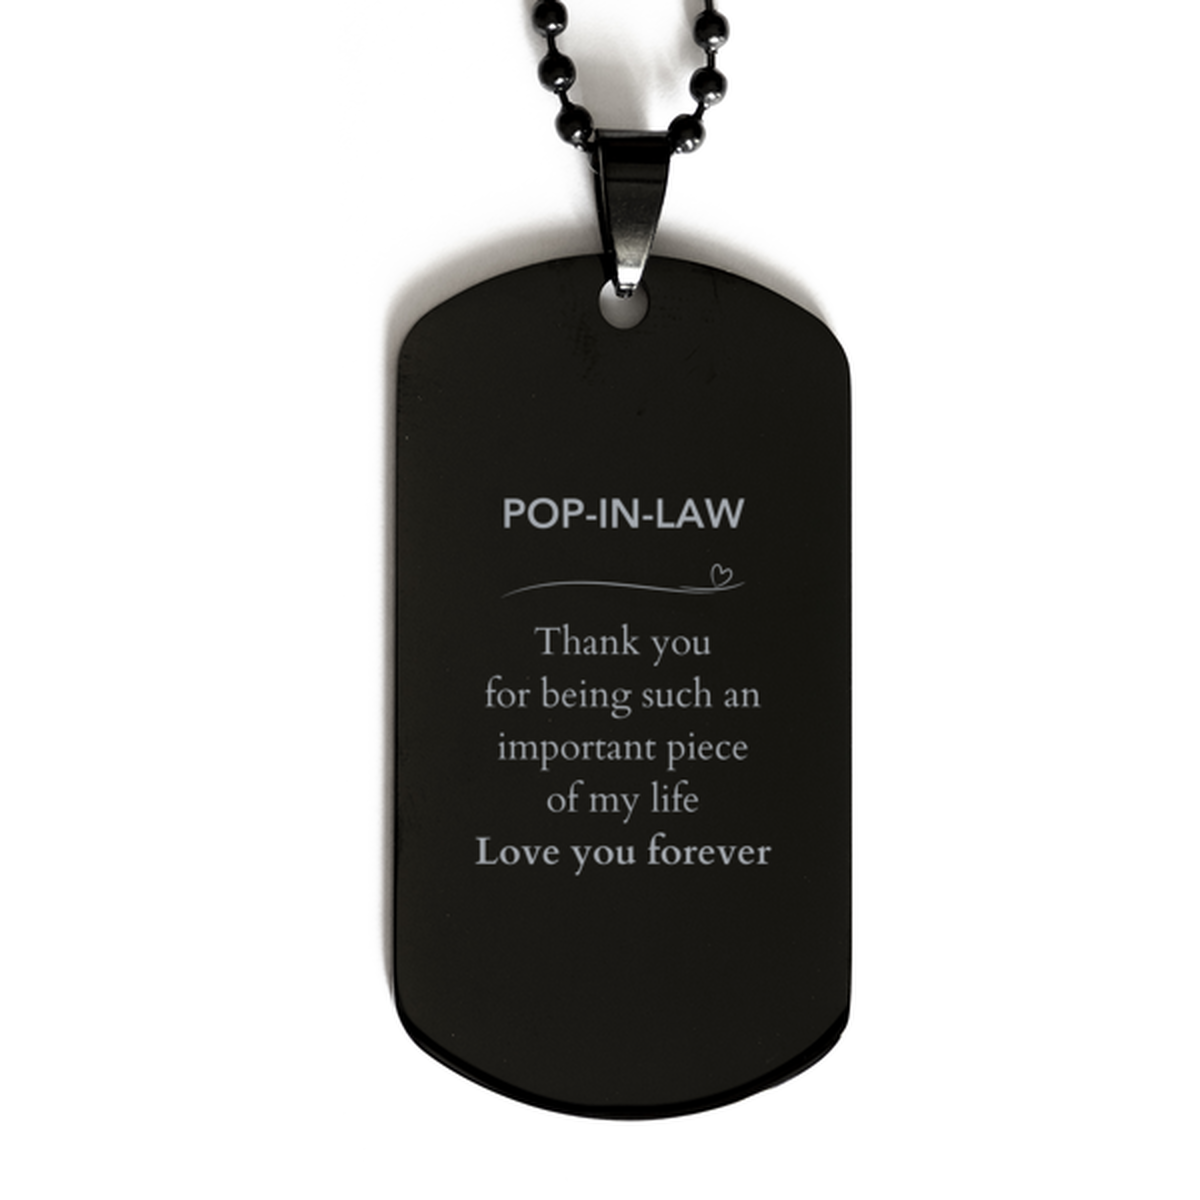 Appropriate Pop-in-law Black Dog Tag Epic Birthday Gifts for Pop-in-law Thank you for being such an important piece of my life Pop-in-law Christmas Mothers Fathers Day